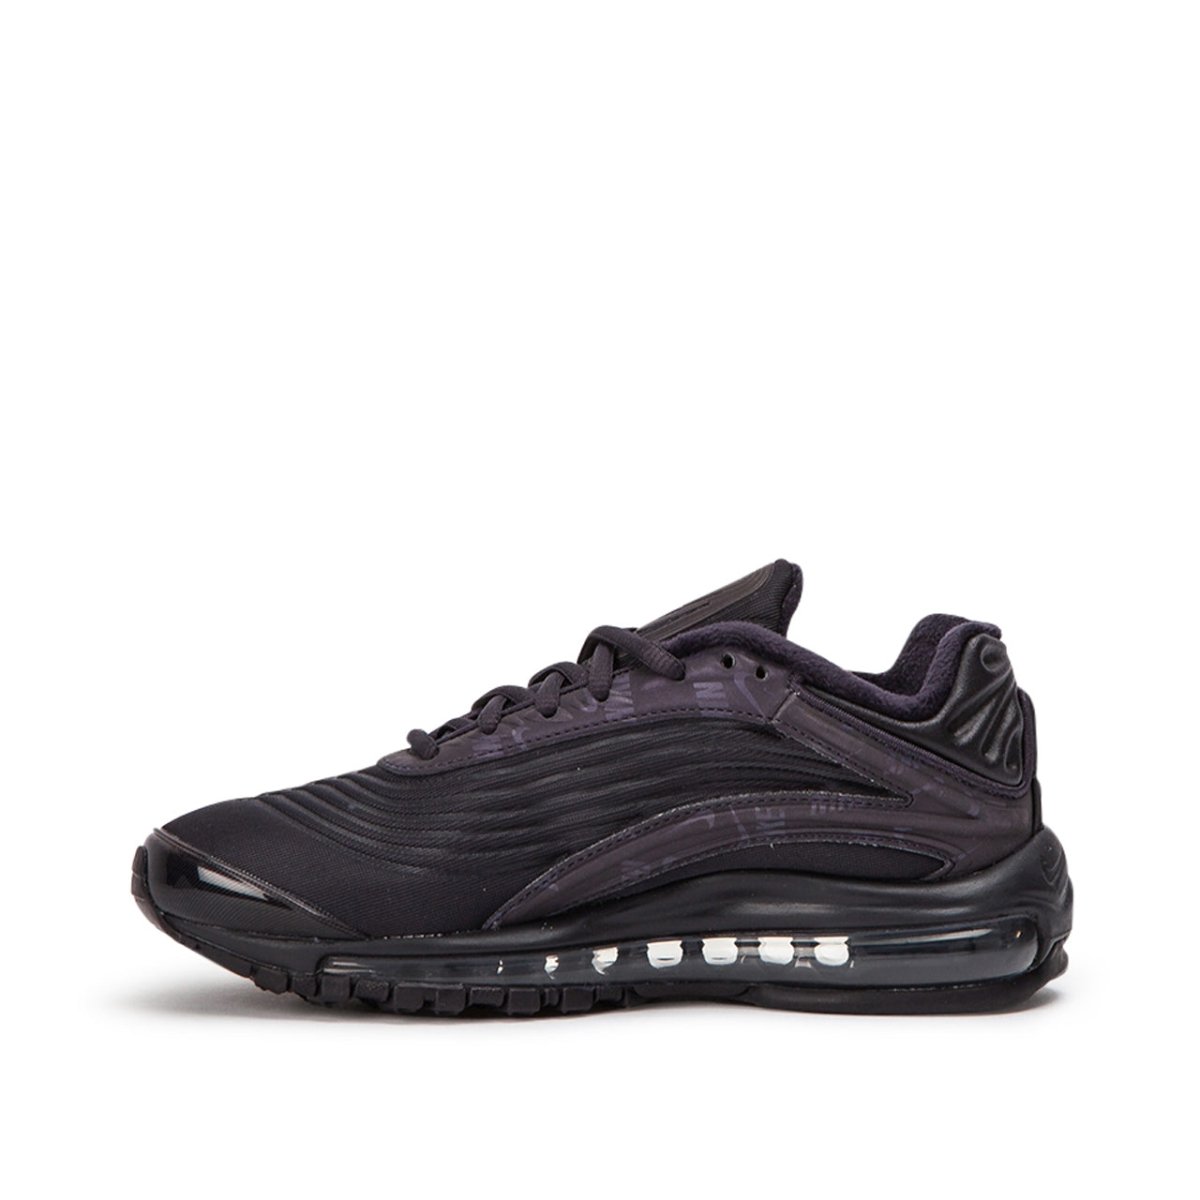 Nike WMNS Air Max Deluxe SE (Schwarz)  - Allike Store